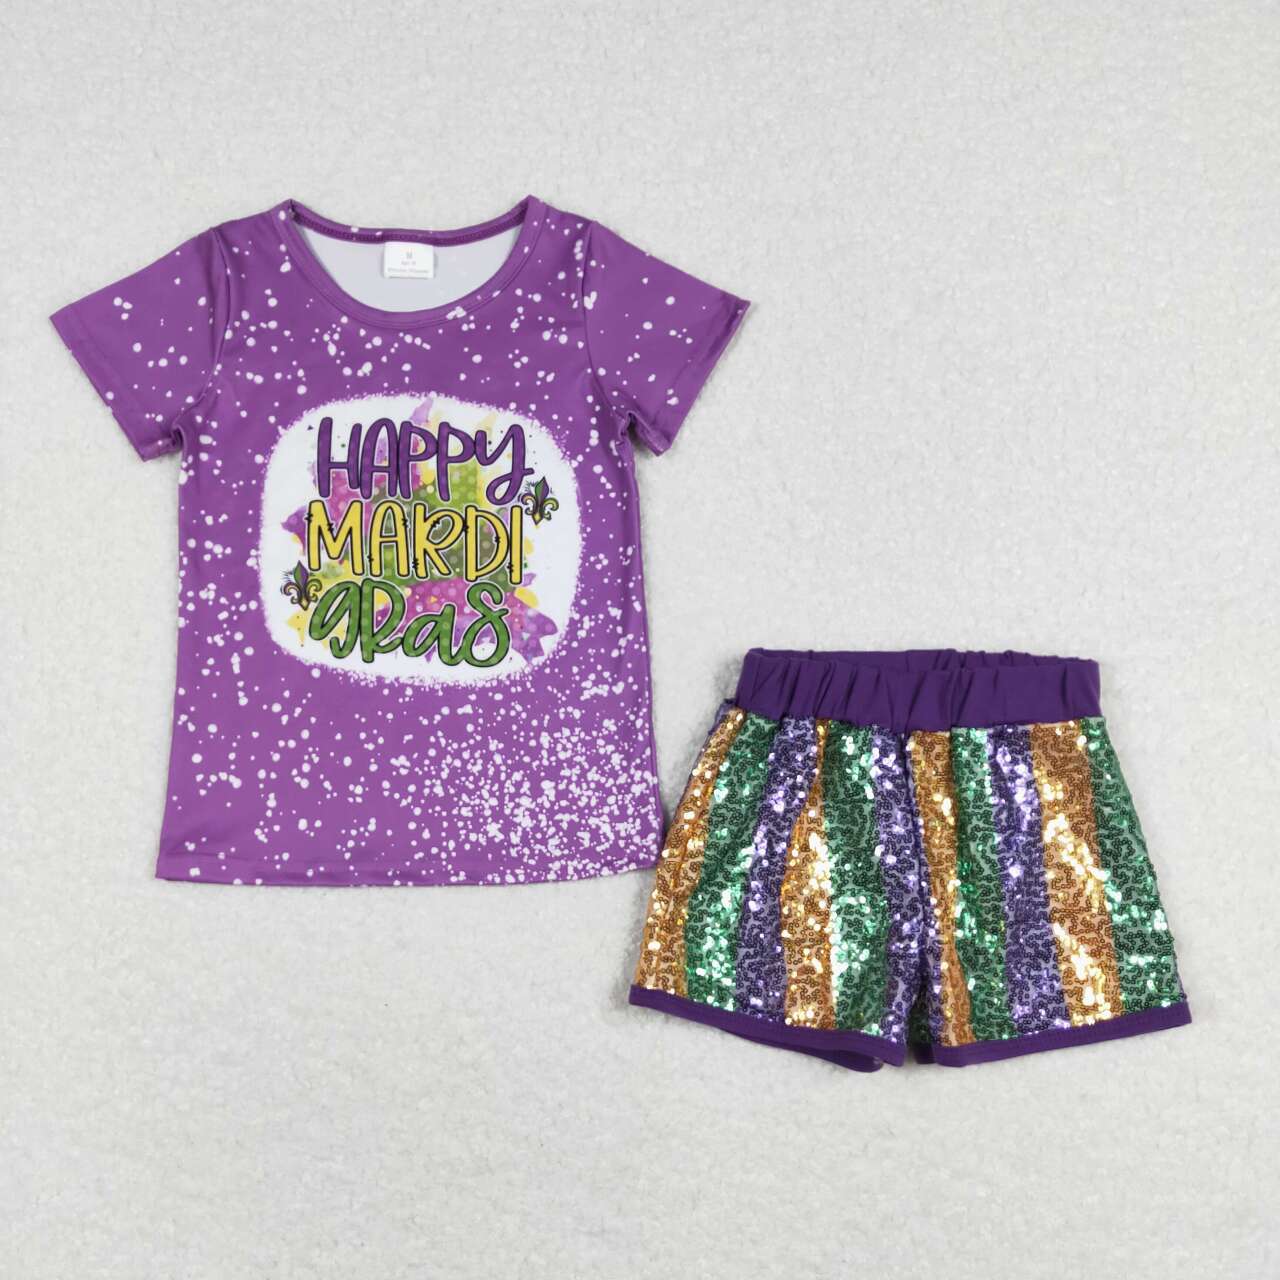 Happy Mardi Gras bleach top matching sequins shorts outfit